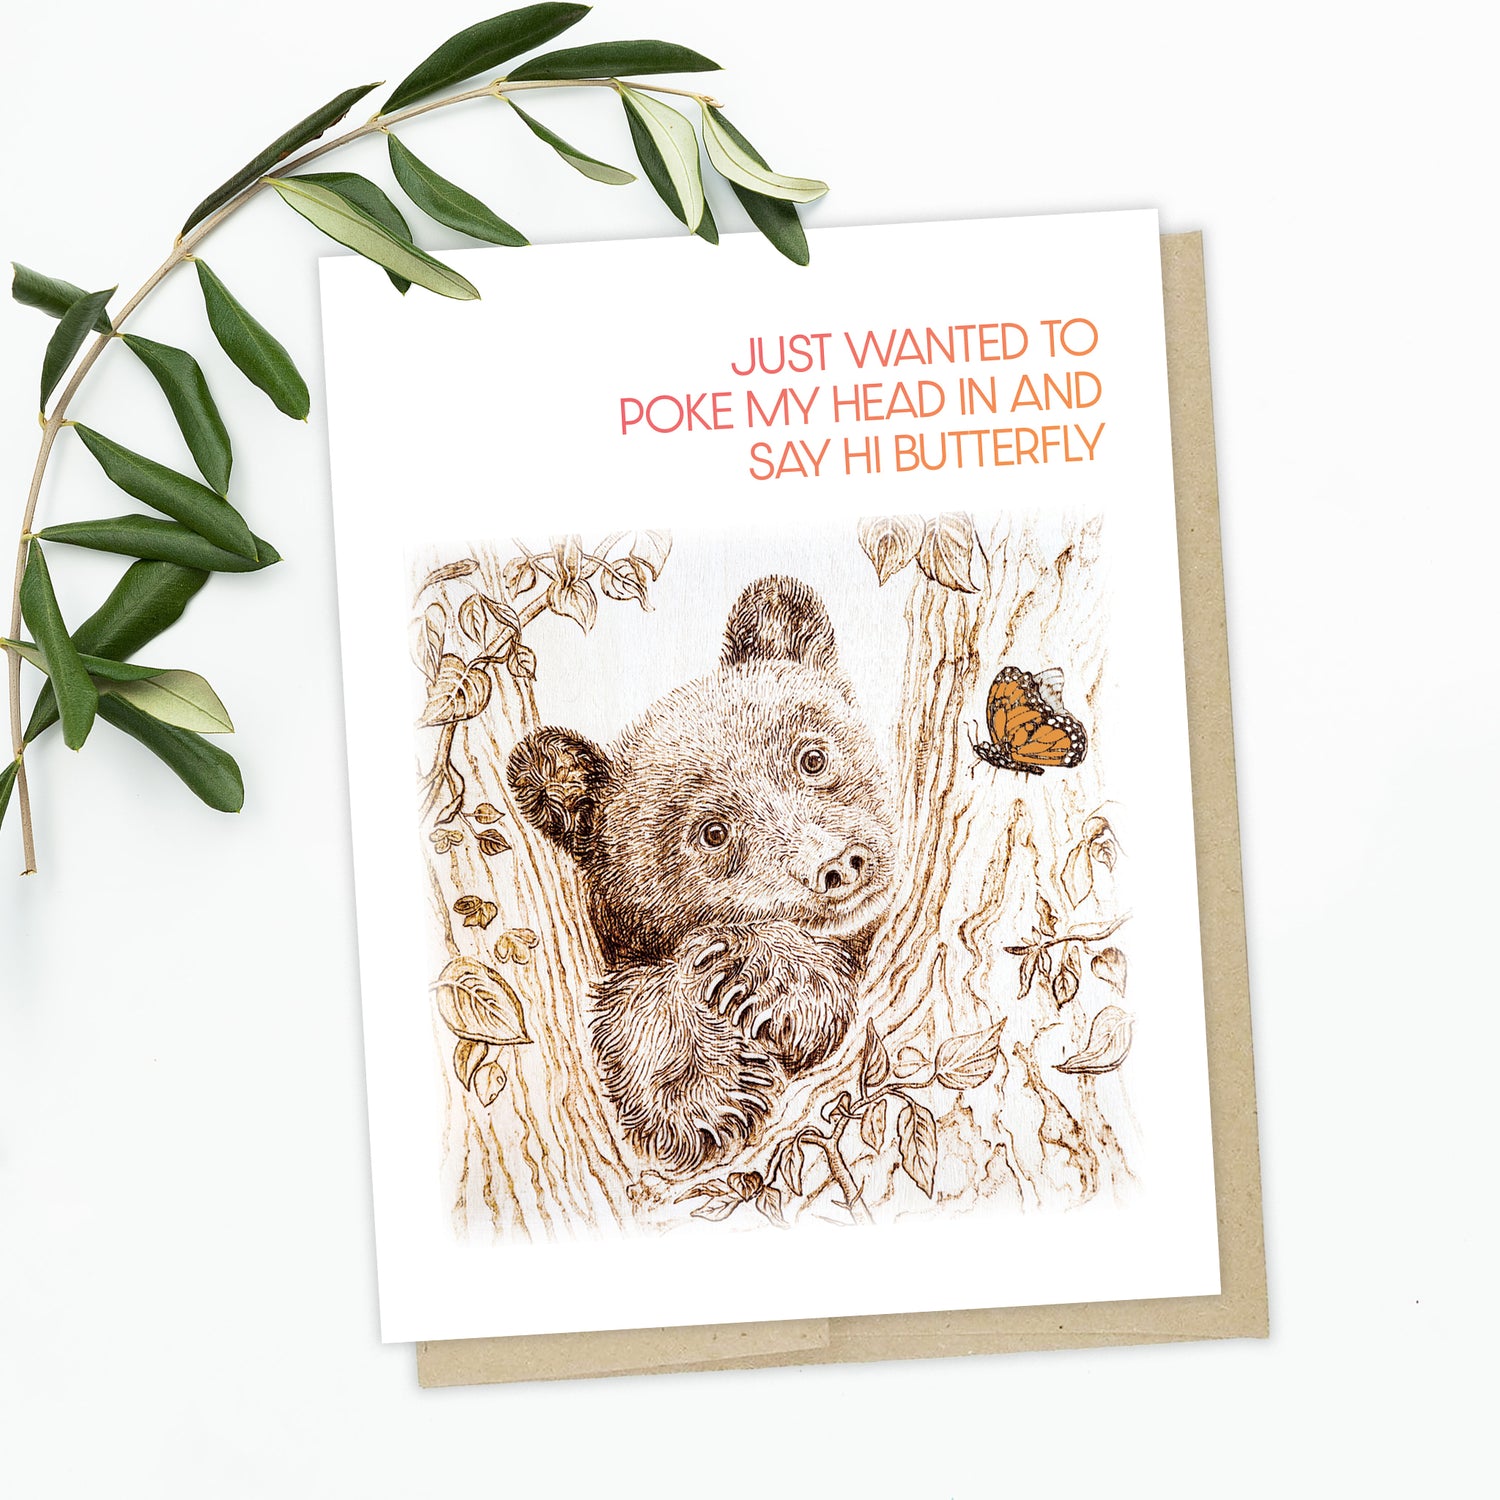 A "Just Because" Card with a pyrography art hand drawn bear poking his head and paws out in between lush trees, checking in on a monarch butterfly. Text reads "Just Wanted to poke my head in and say hi butterfly"